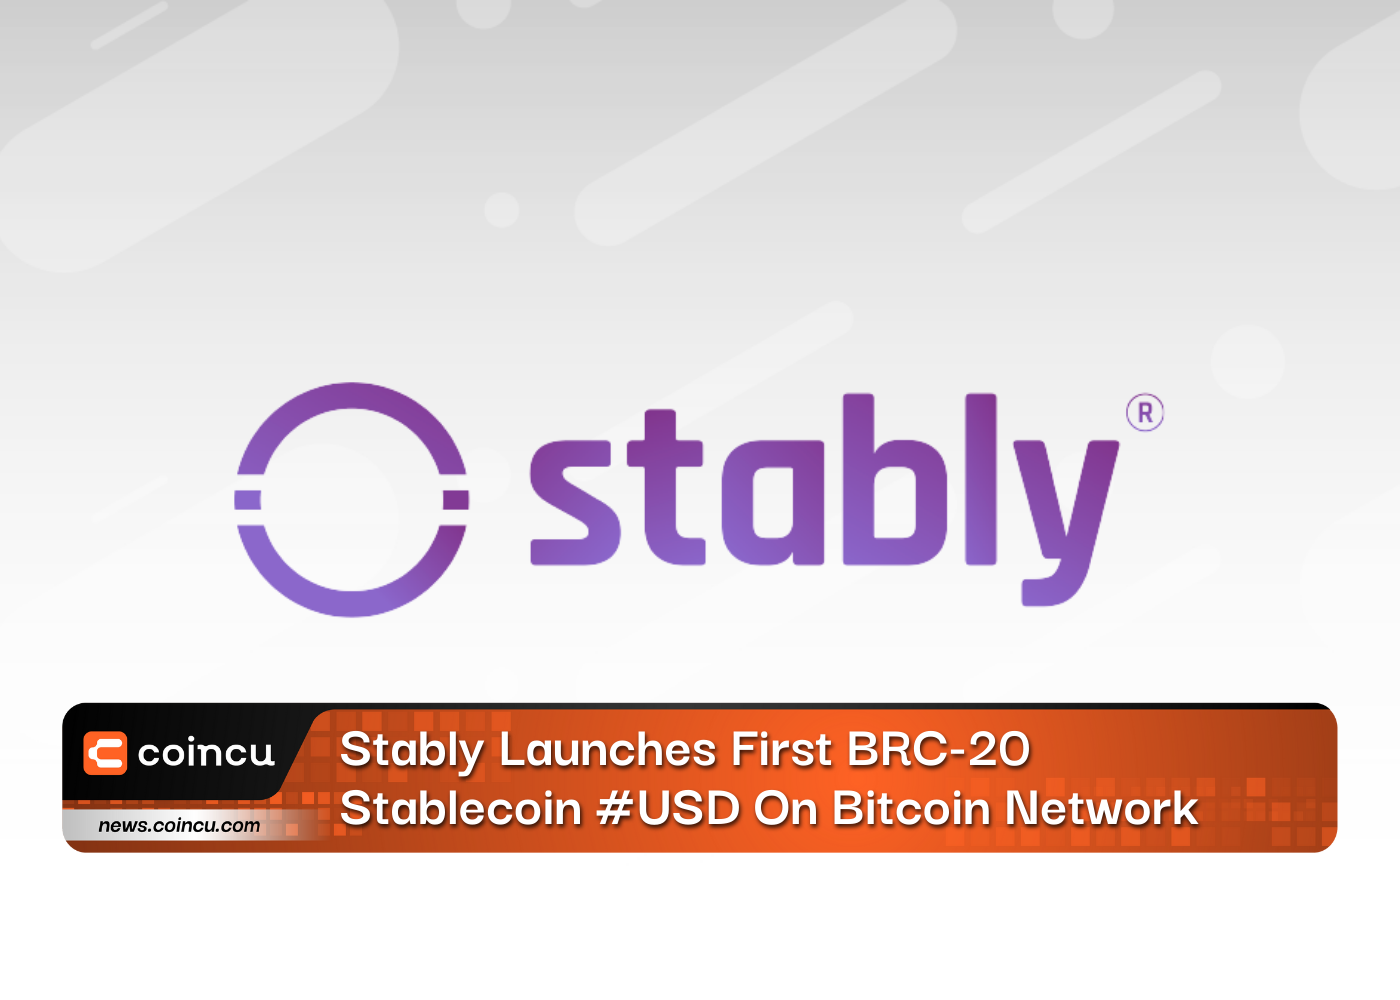 Stably Launches First BRC-20 Stablecoin #USD On Bitcoin Network